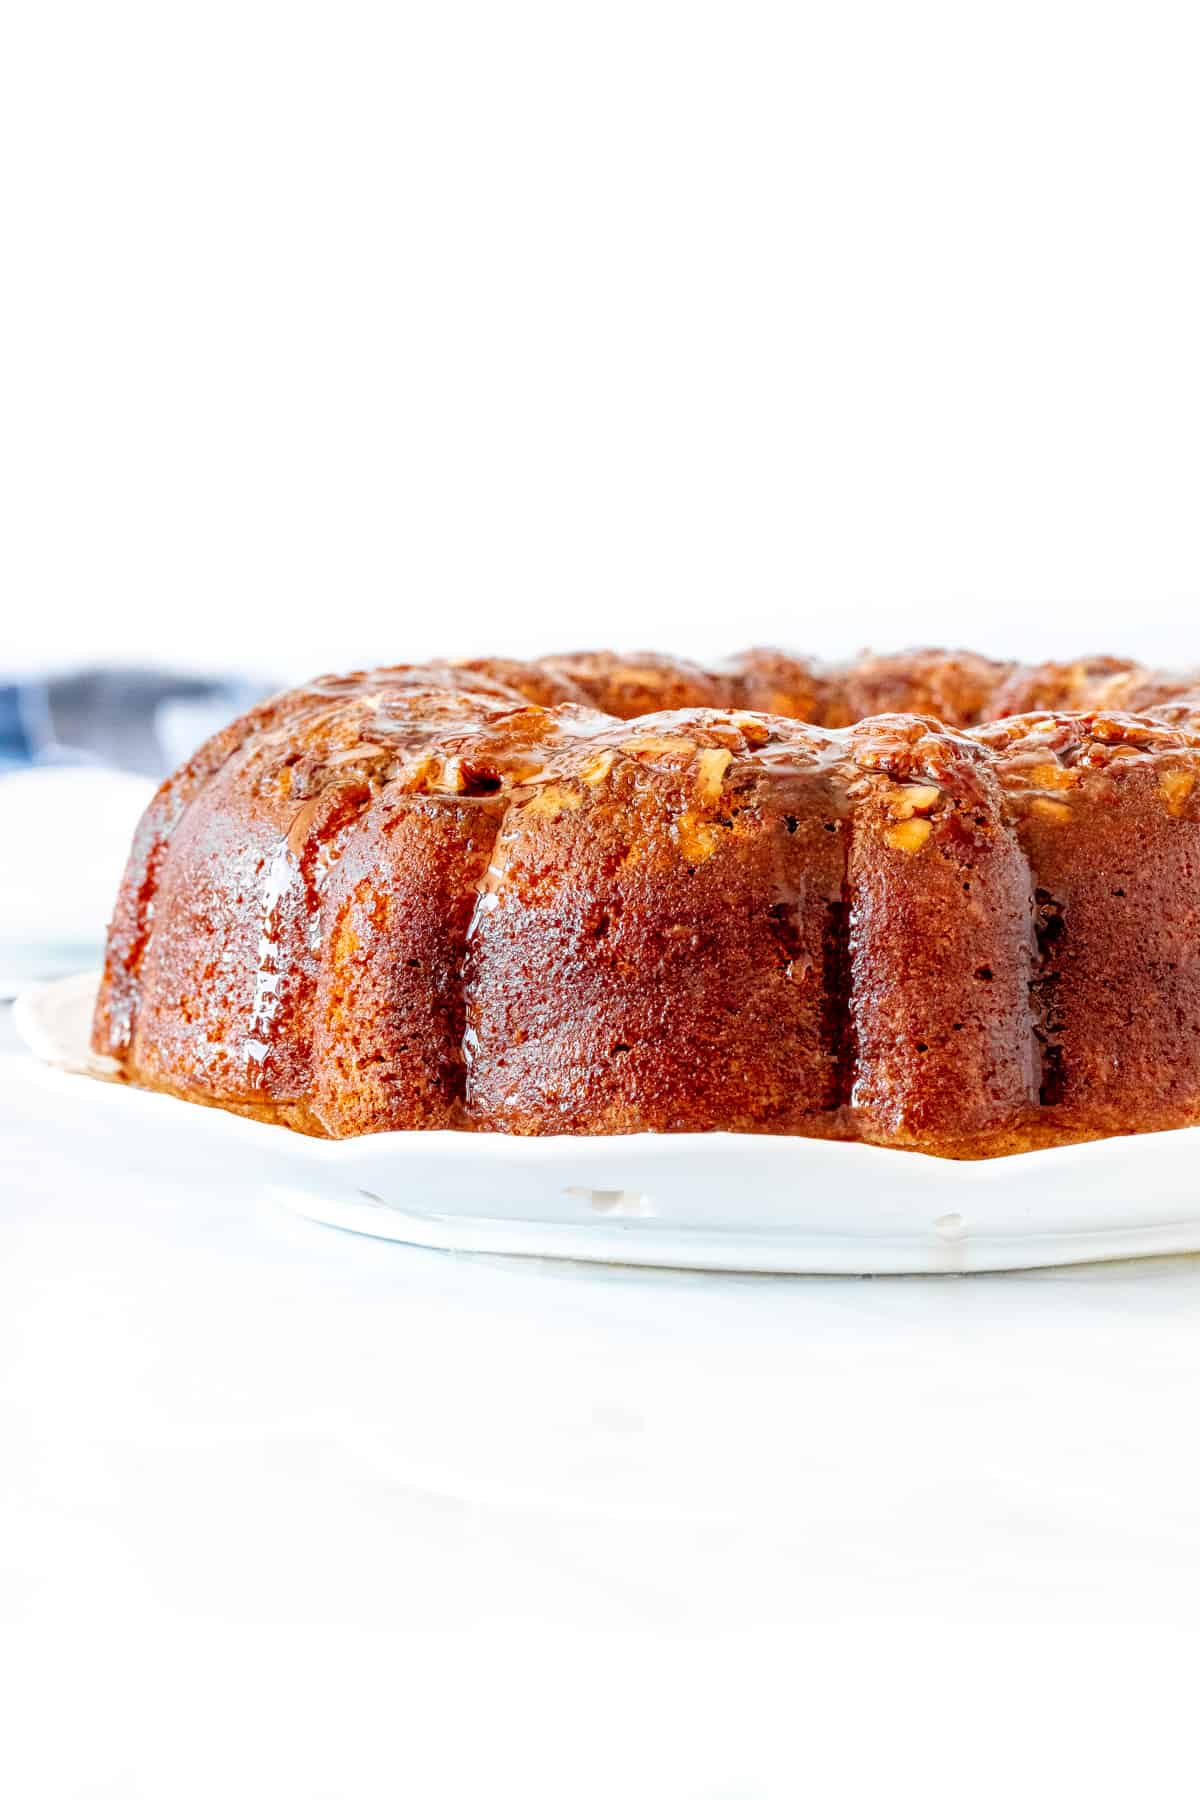 Rum-soaked cake, made in a fluted bundt pan